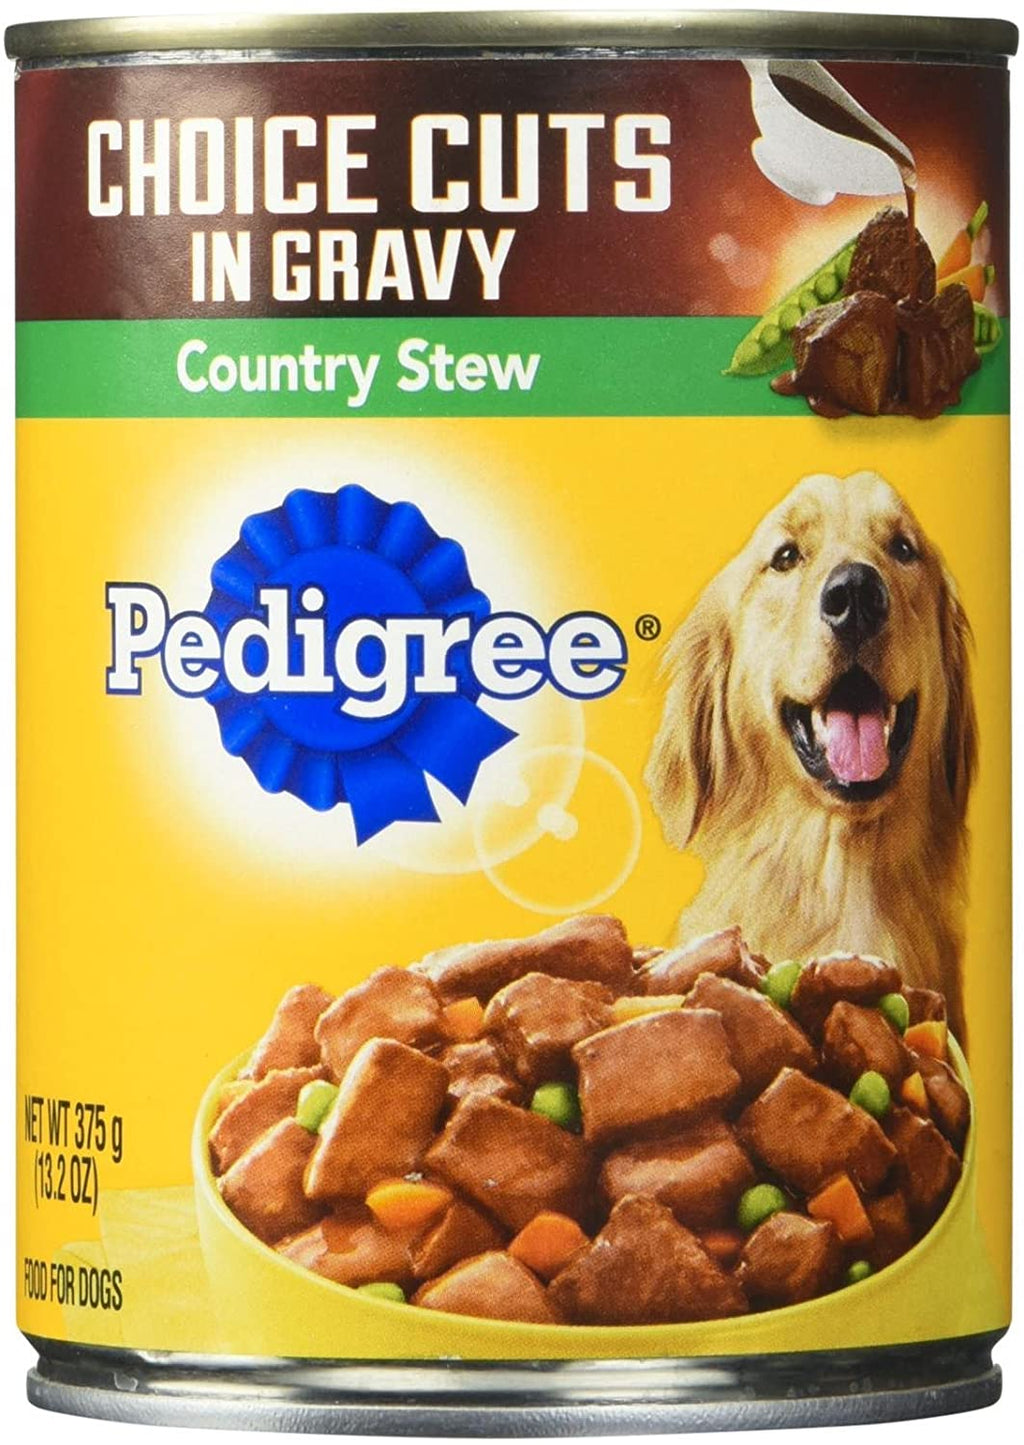 Pedigree Choice Cuts Country Stew Canned Dog Food - 13.2 oz - Case of 12  